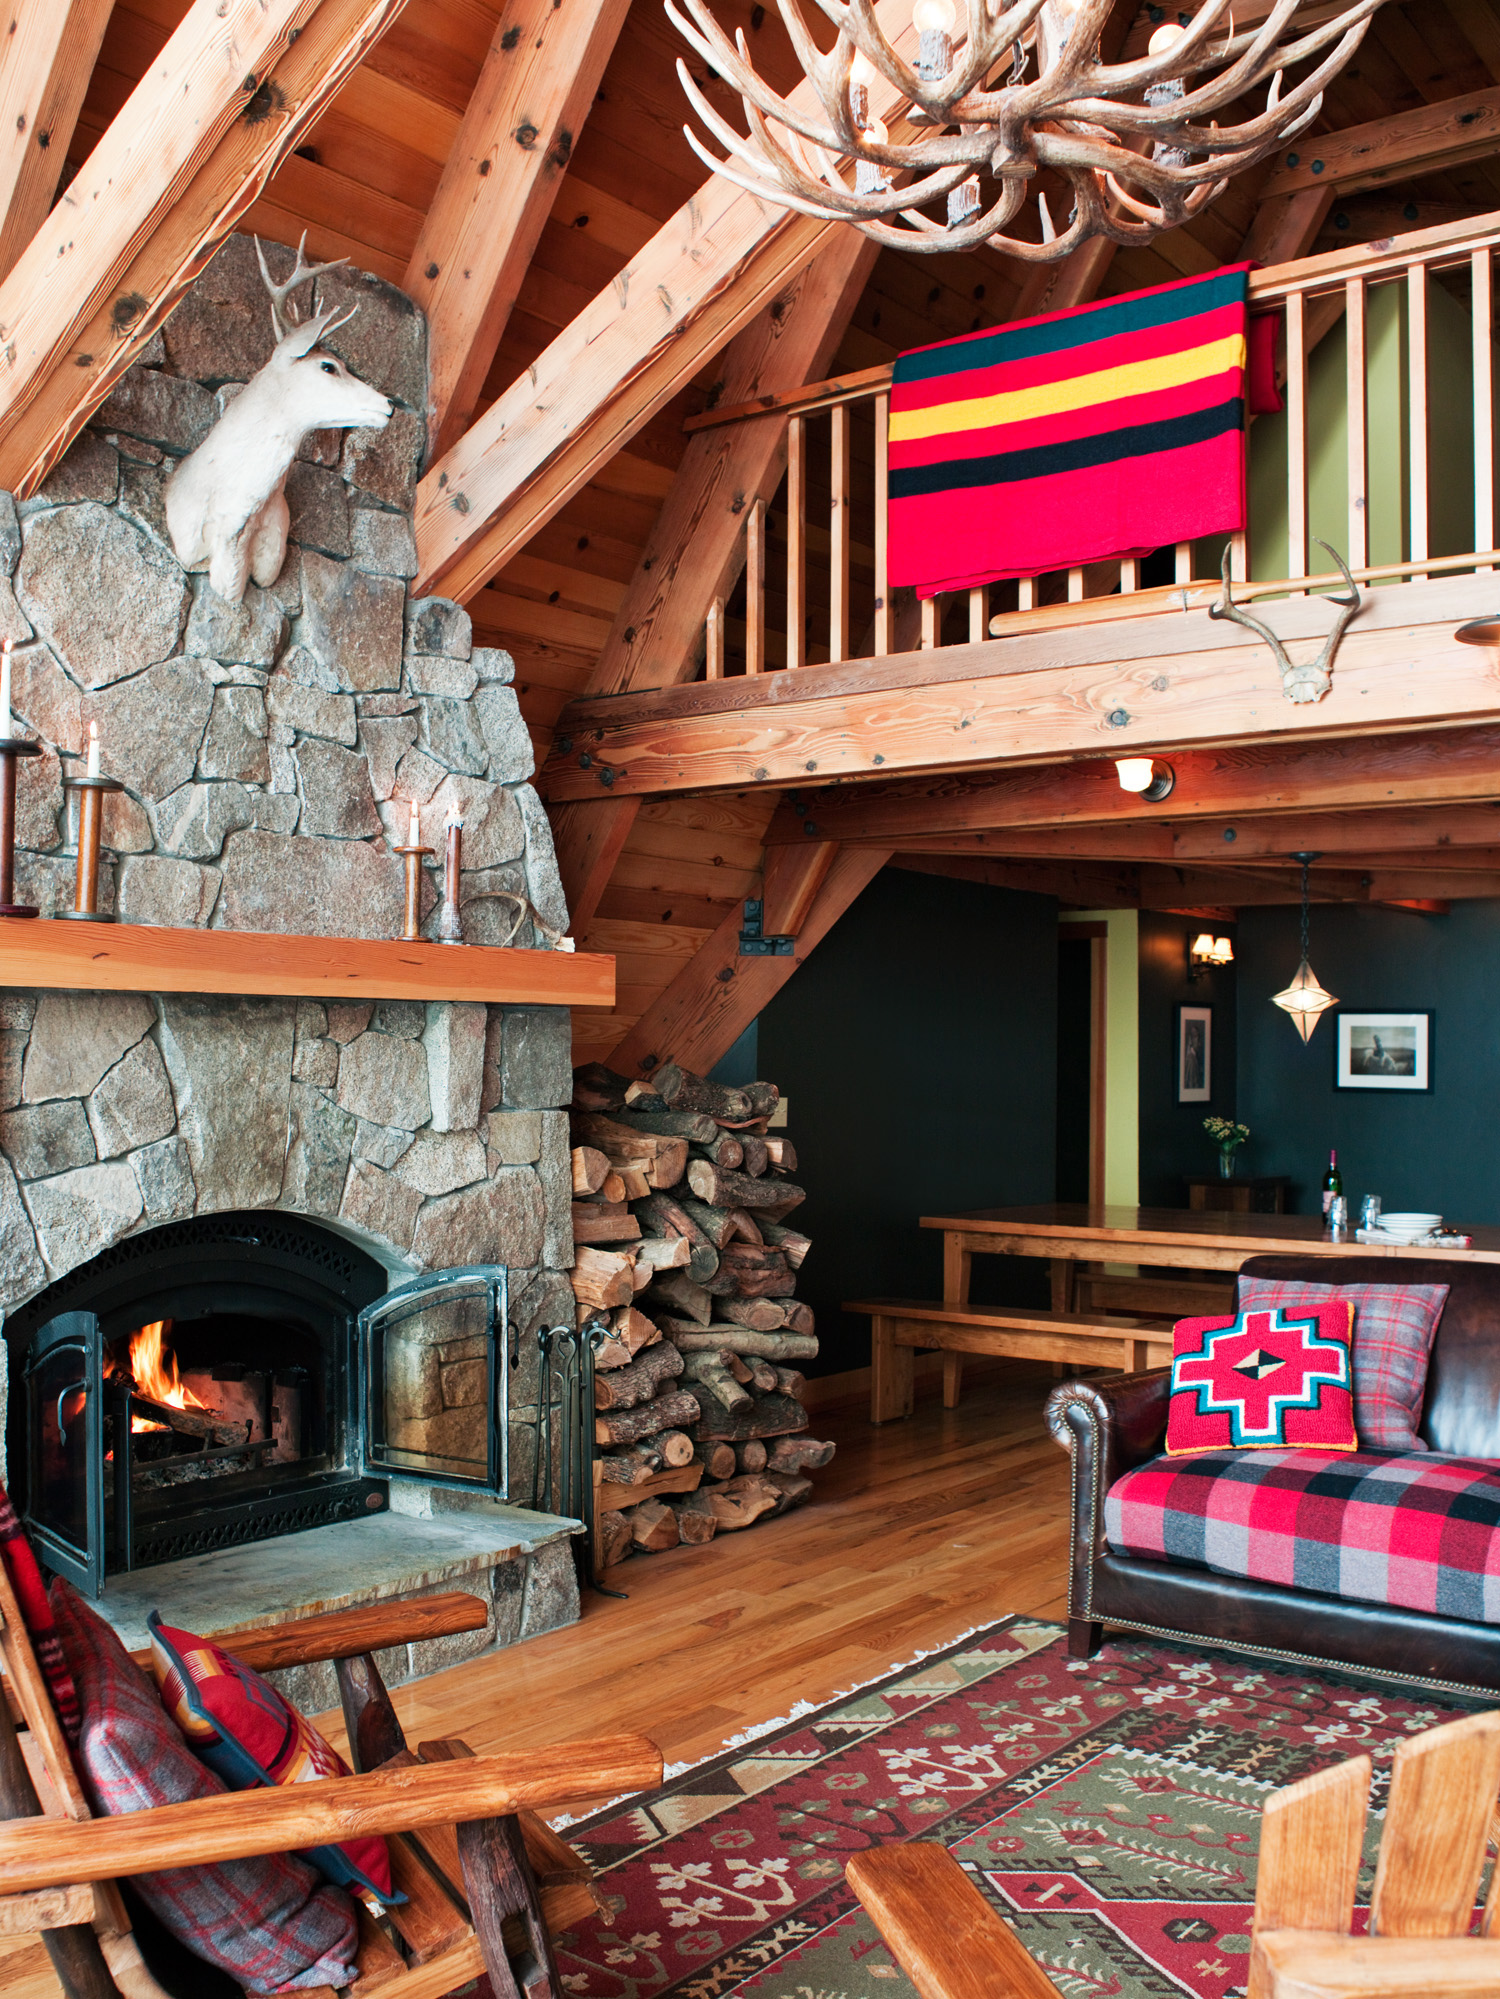 How to Get Perfect Lodge Decor at Home